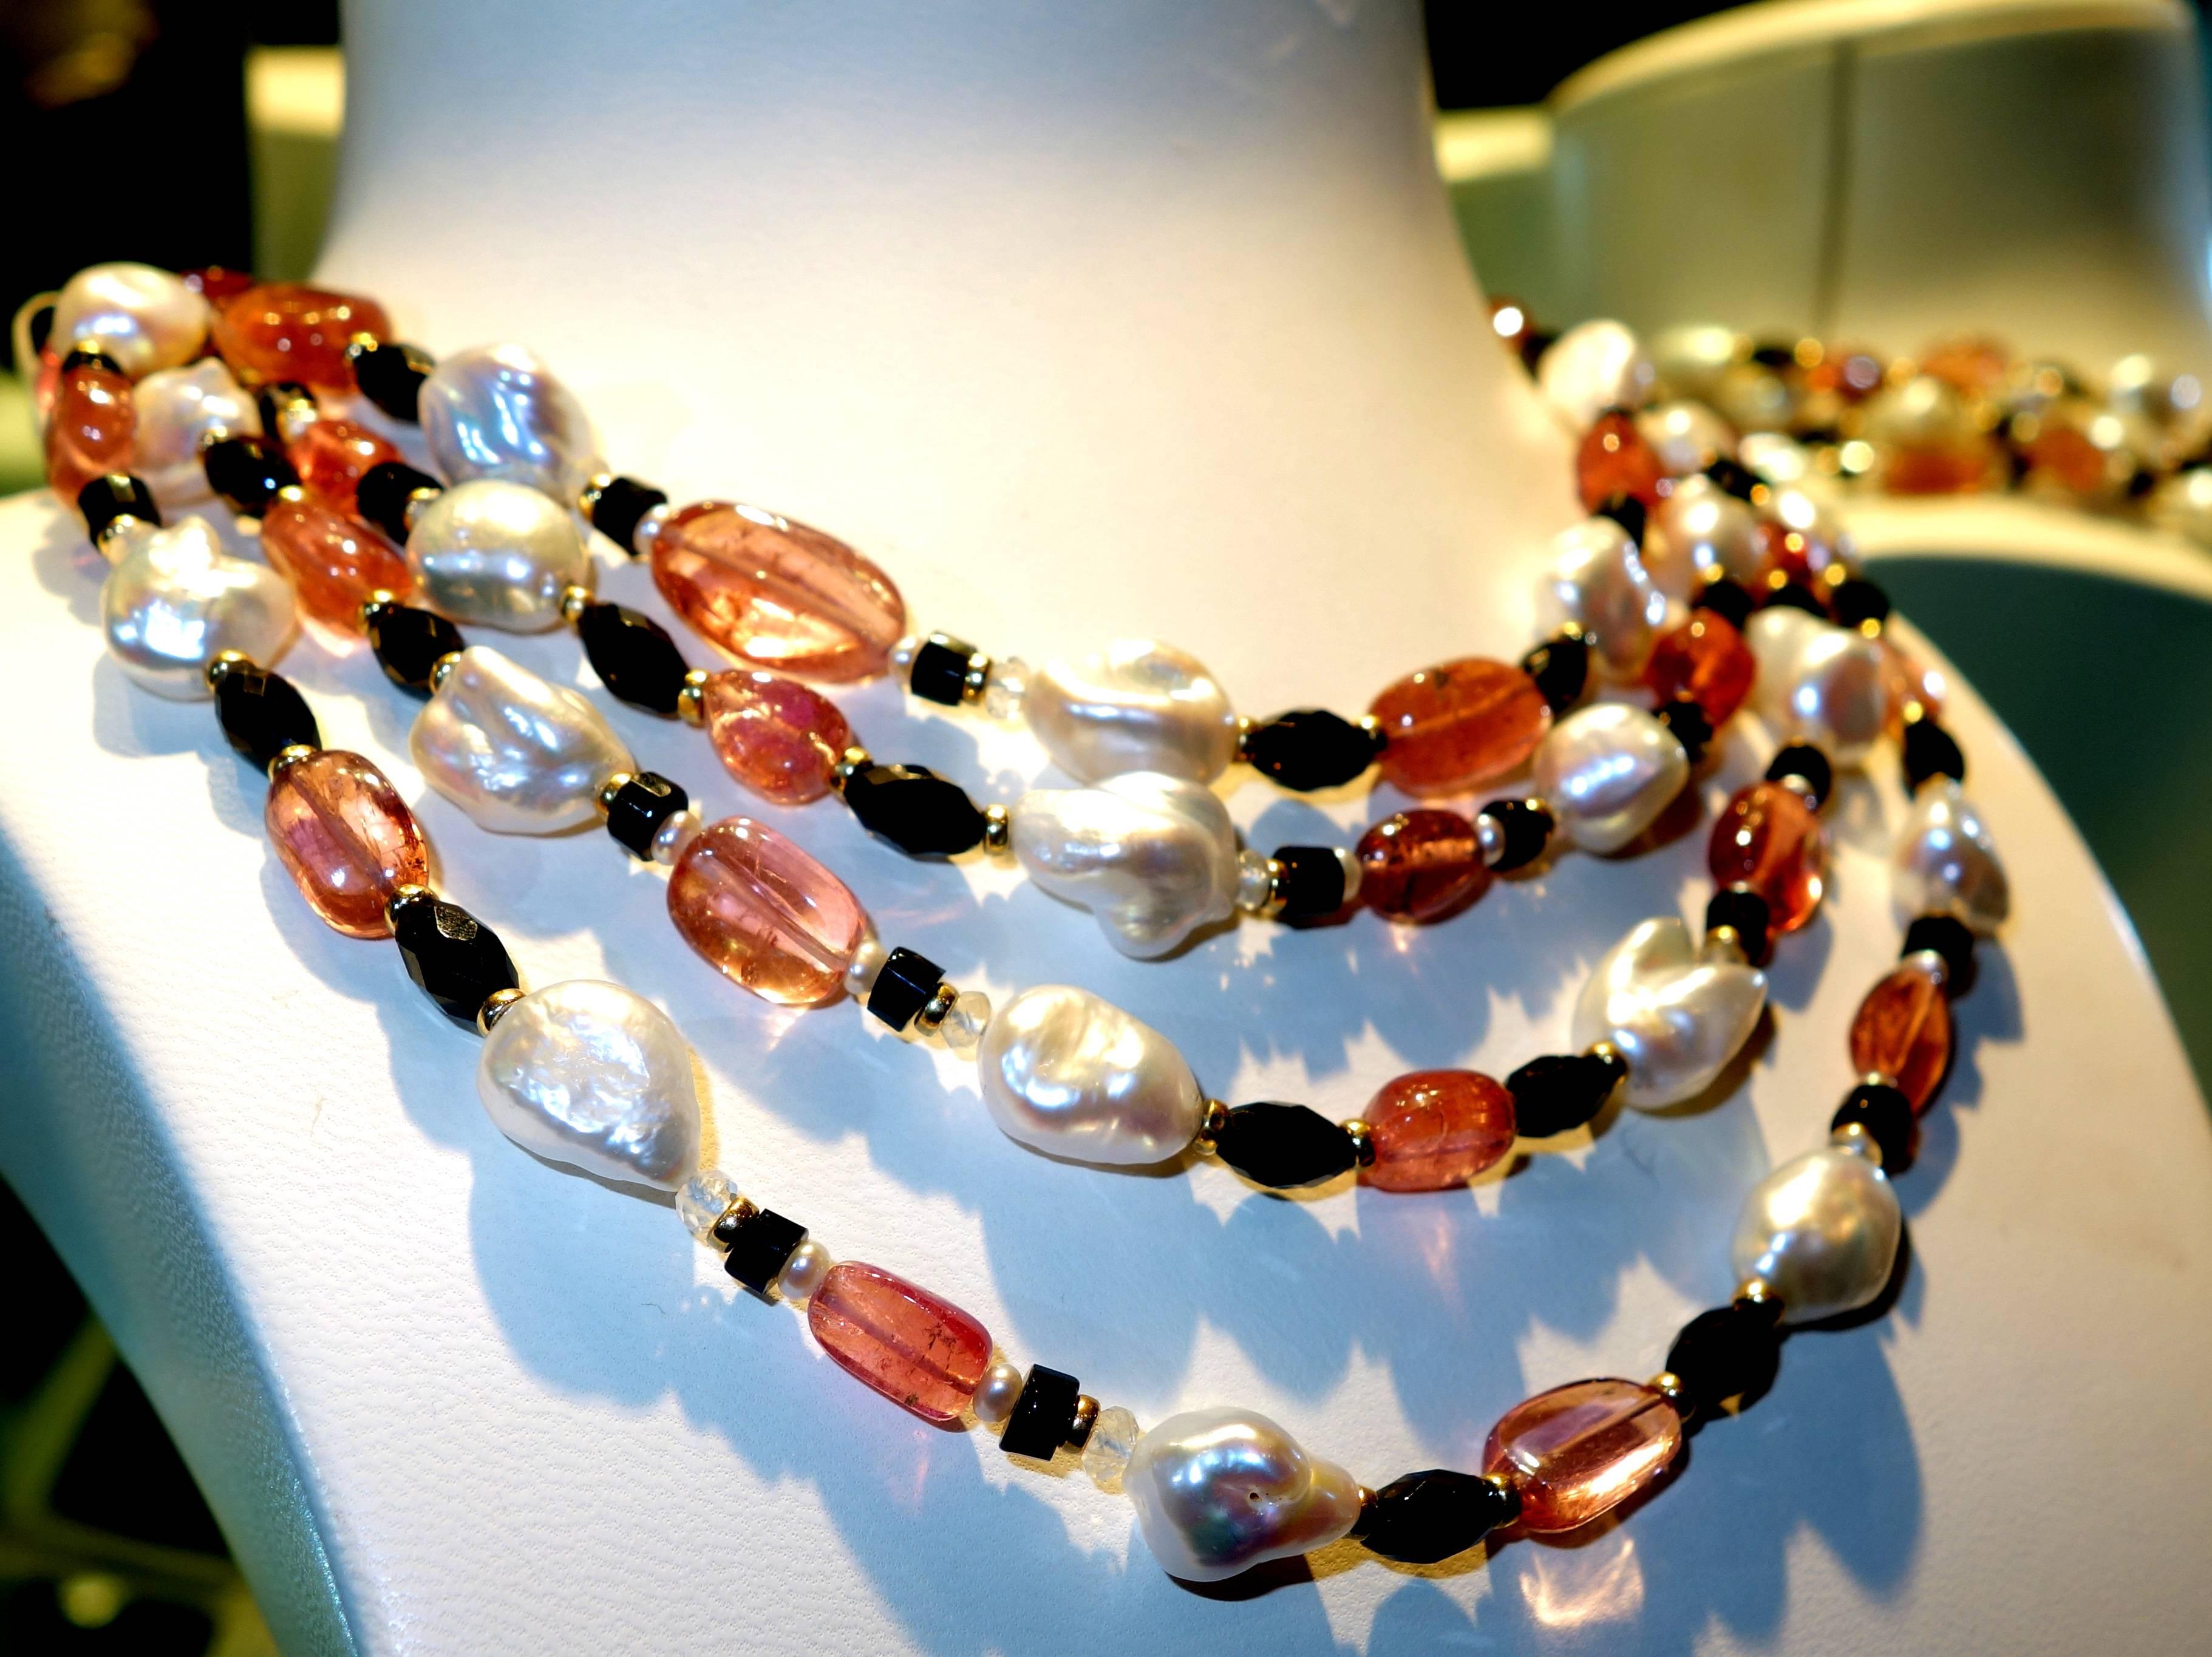 The free form pink tourmaline is a bright strong pink color it is accented with white baroque pearls, onyx and 18K gold beads.  This long necklace is 71 inches in length